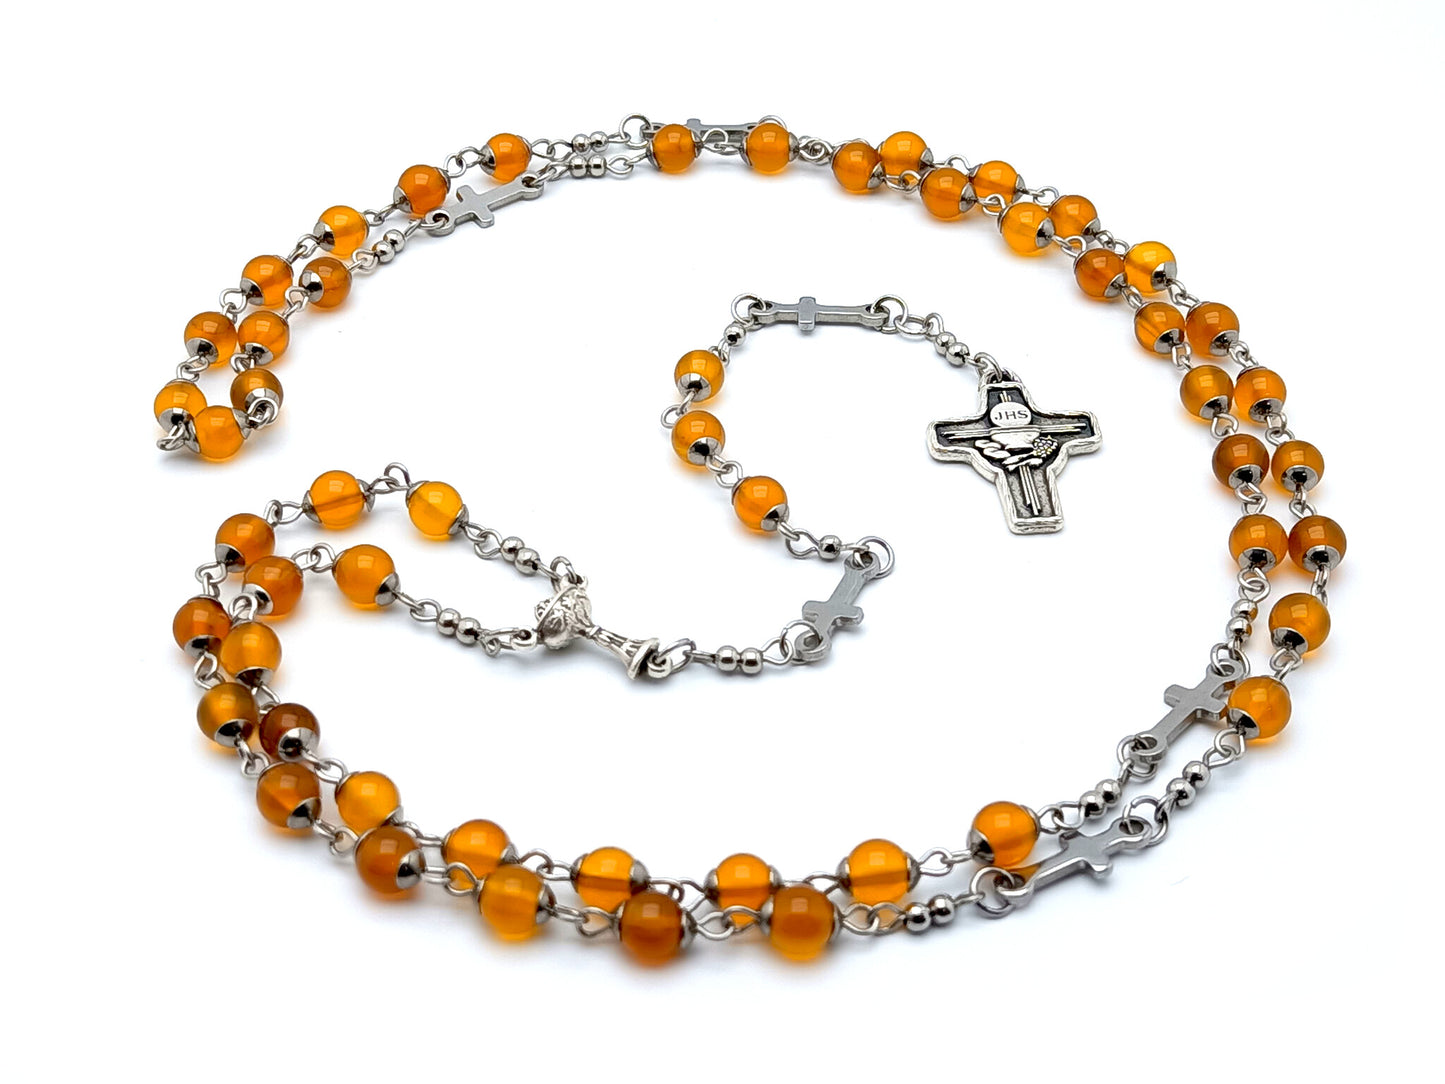 Holy Communion unique rosary beads with orange agate gemstone beads, Holy Eucharist crucifx and chalice centre medal.